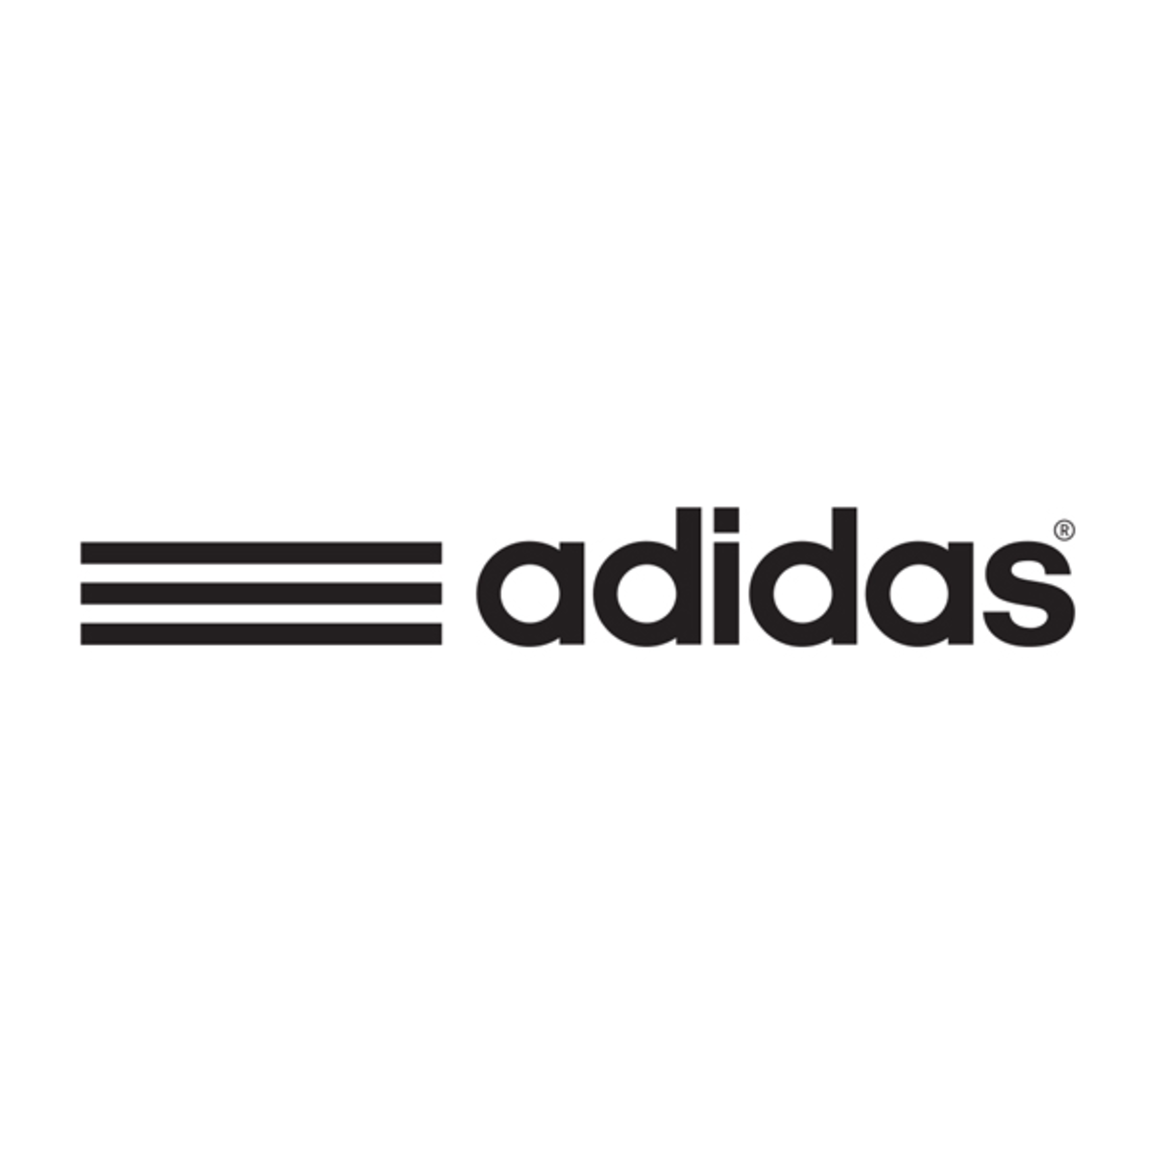 adidas Sports Performance at Westfield 